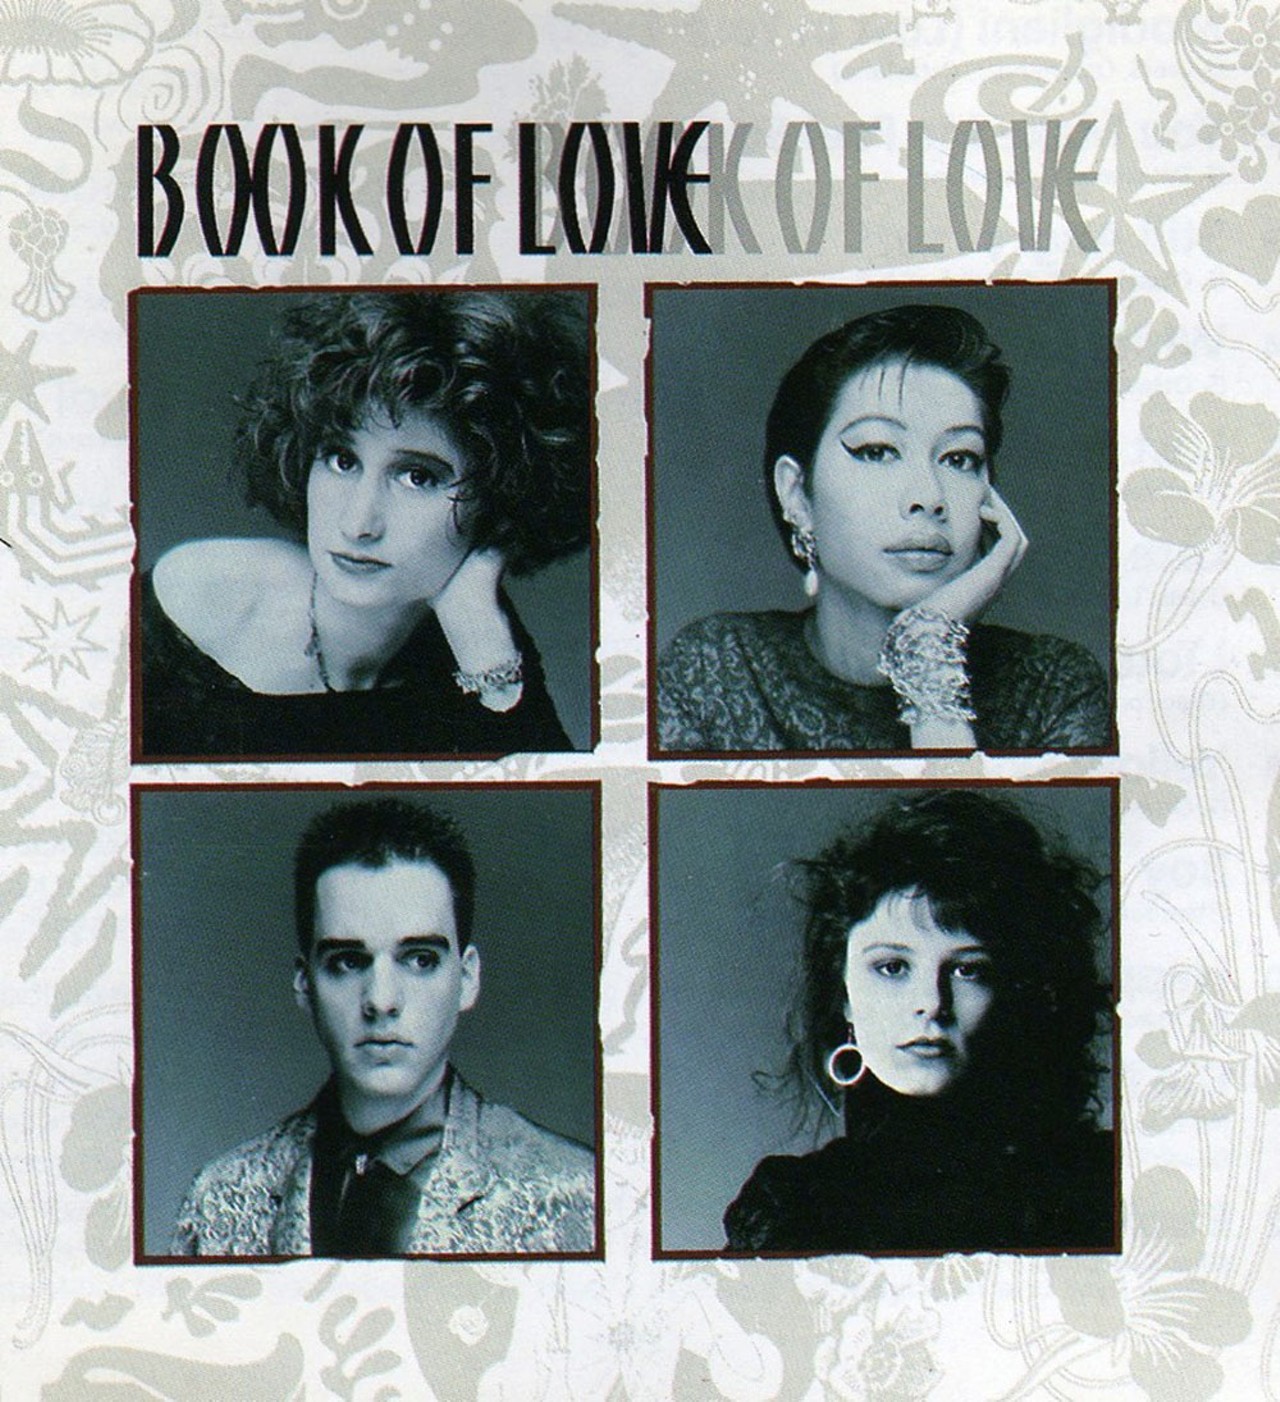 1980s dance quartet Book of Love has regrouped for a 30th anniversary tour. Hits like &#147;I Touch Roses,&#148; which reached No. 1 on the dance charts in 1985, and the socially aware &#147;Pretty Boys and Pretty Girls&#148; will surely be played, along with the infectious &#147;Tubular Bells,&#148; as well as previously unrecorded tracks. The group, which got its start opening for Depeche Mode, is going to be a must-see for any former new wavers. 
Friday, 10/14; Book of Love @ The Magic Bag; Doors open at 8 p.m.; 22920 Michigan Ave., Ferndale; themagicbag.com; tickets are $20.